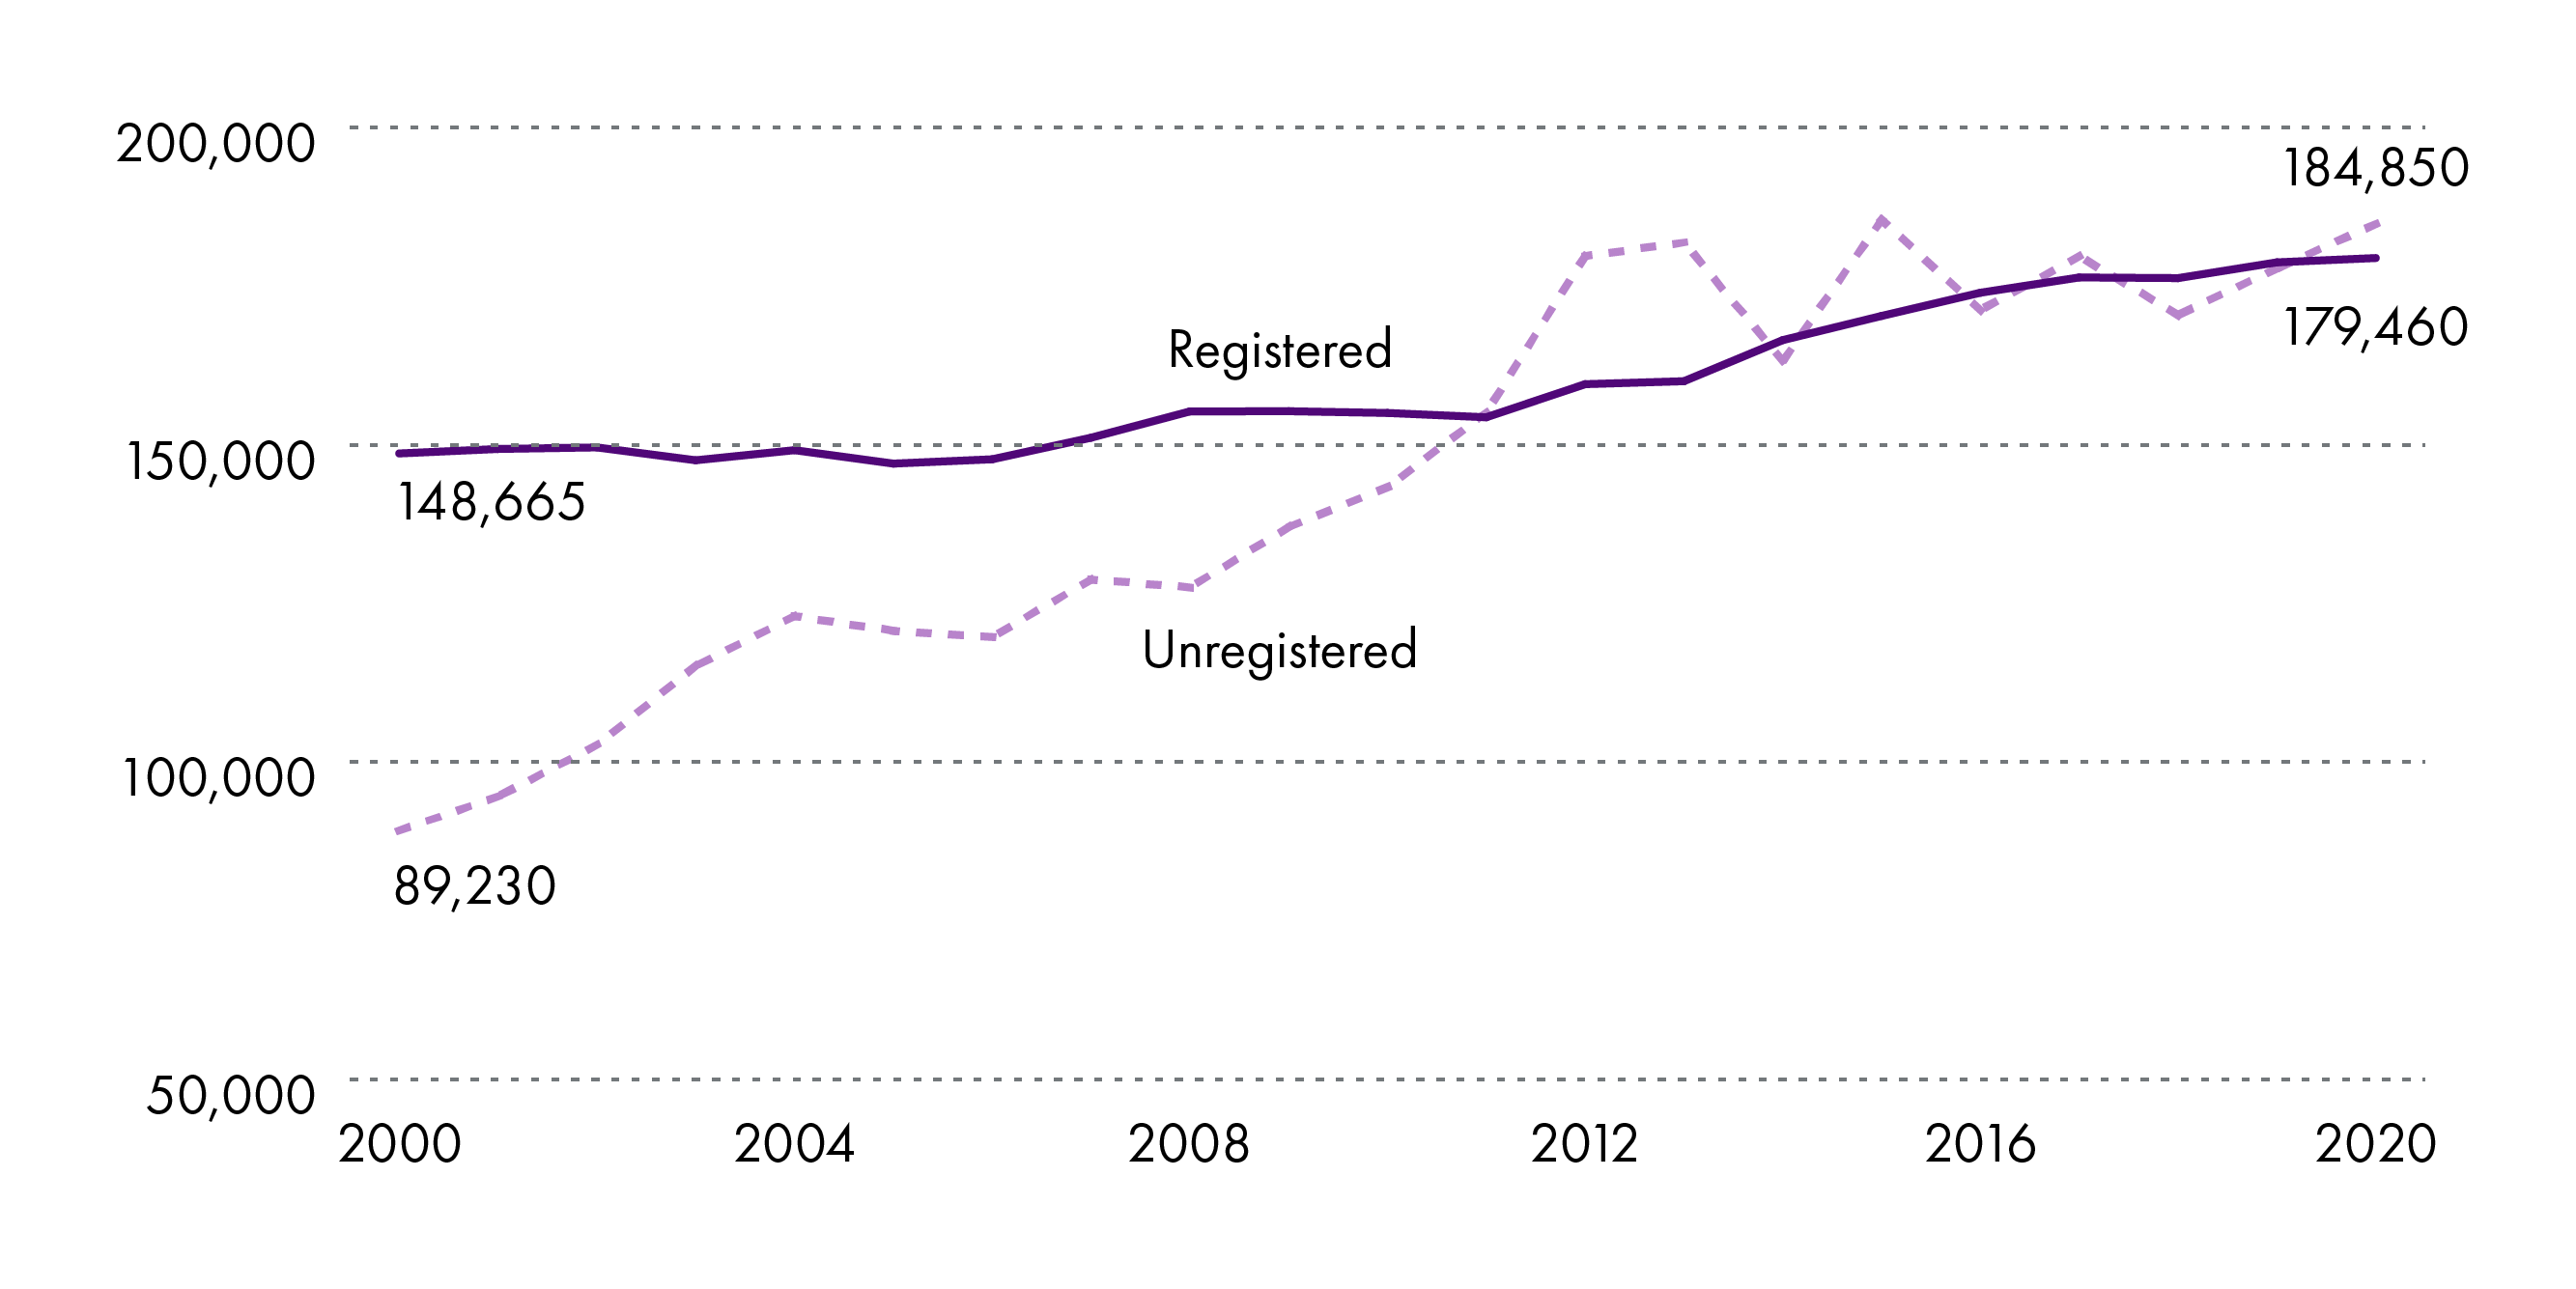 The chart shows the number of unregistered businesses has grown steeply between 2000 and 2020, while registered businesses have had a more steady rate of incline.